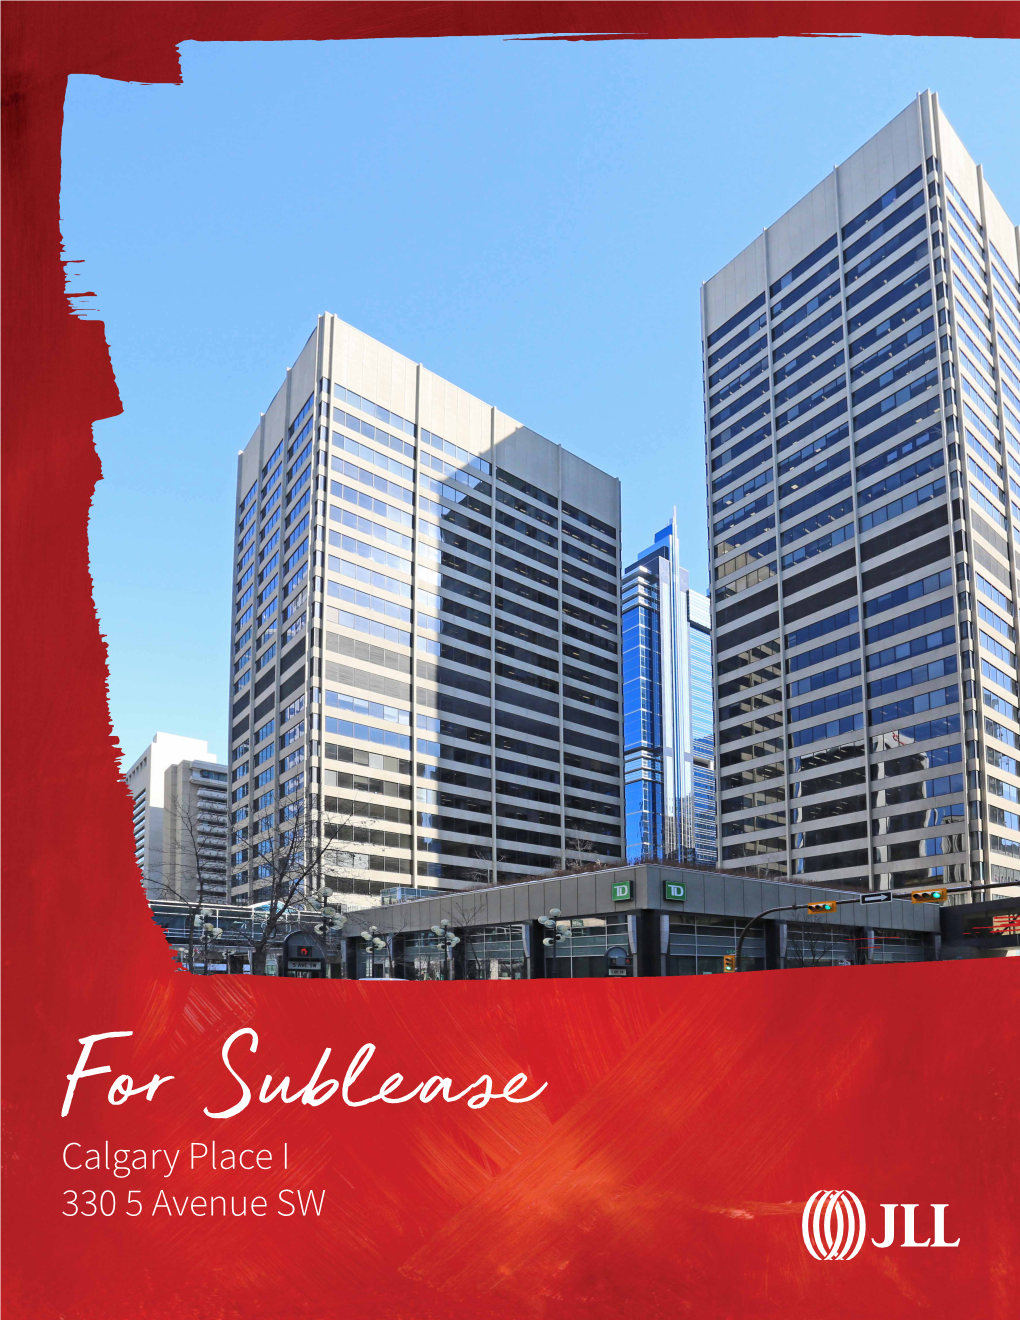 For Sublease Calgary Place I 330 5 Avenue SW Property Details Sublandlord Steel River Group Ltd